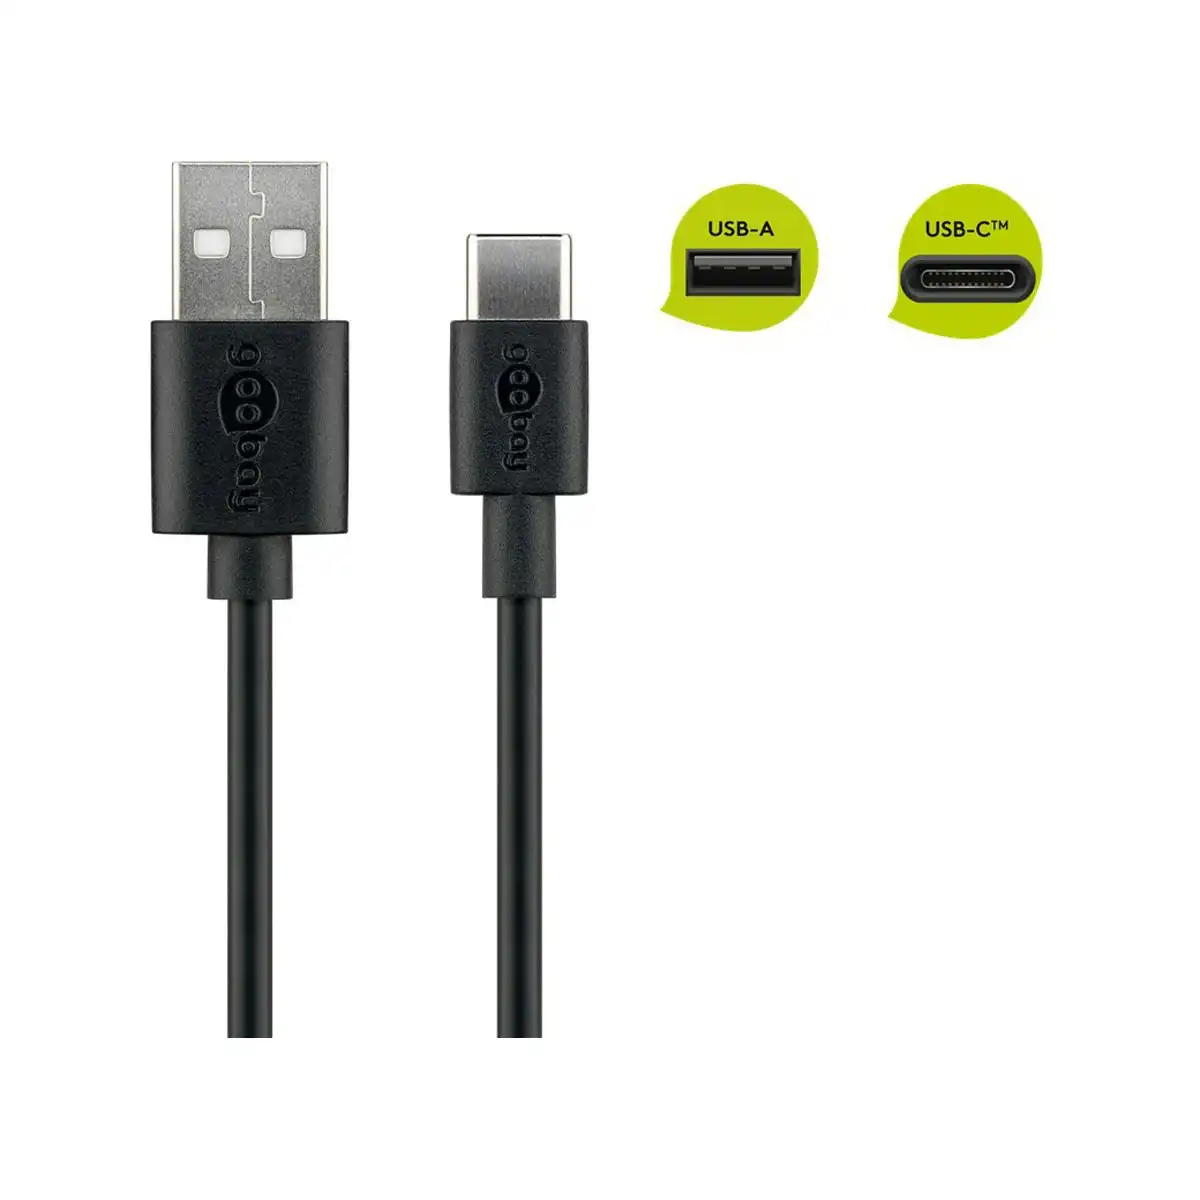 Goobay USB-A to USB-C 2.0 cable 0.1M for Mobiles and Laptops - Black